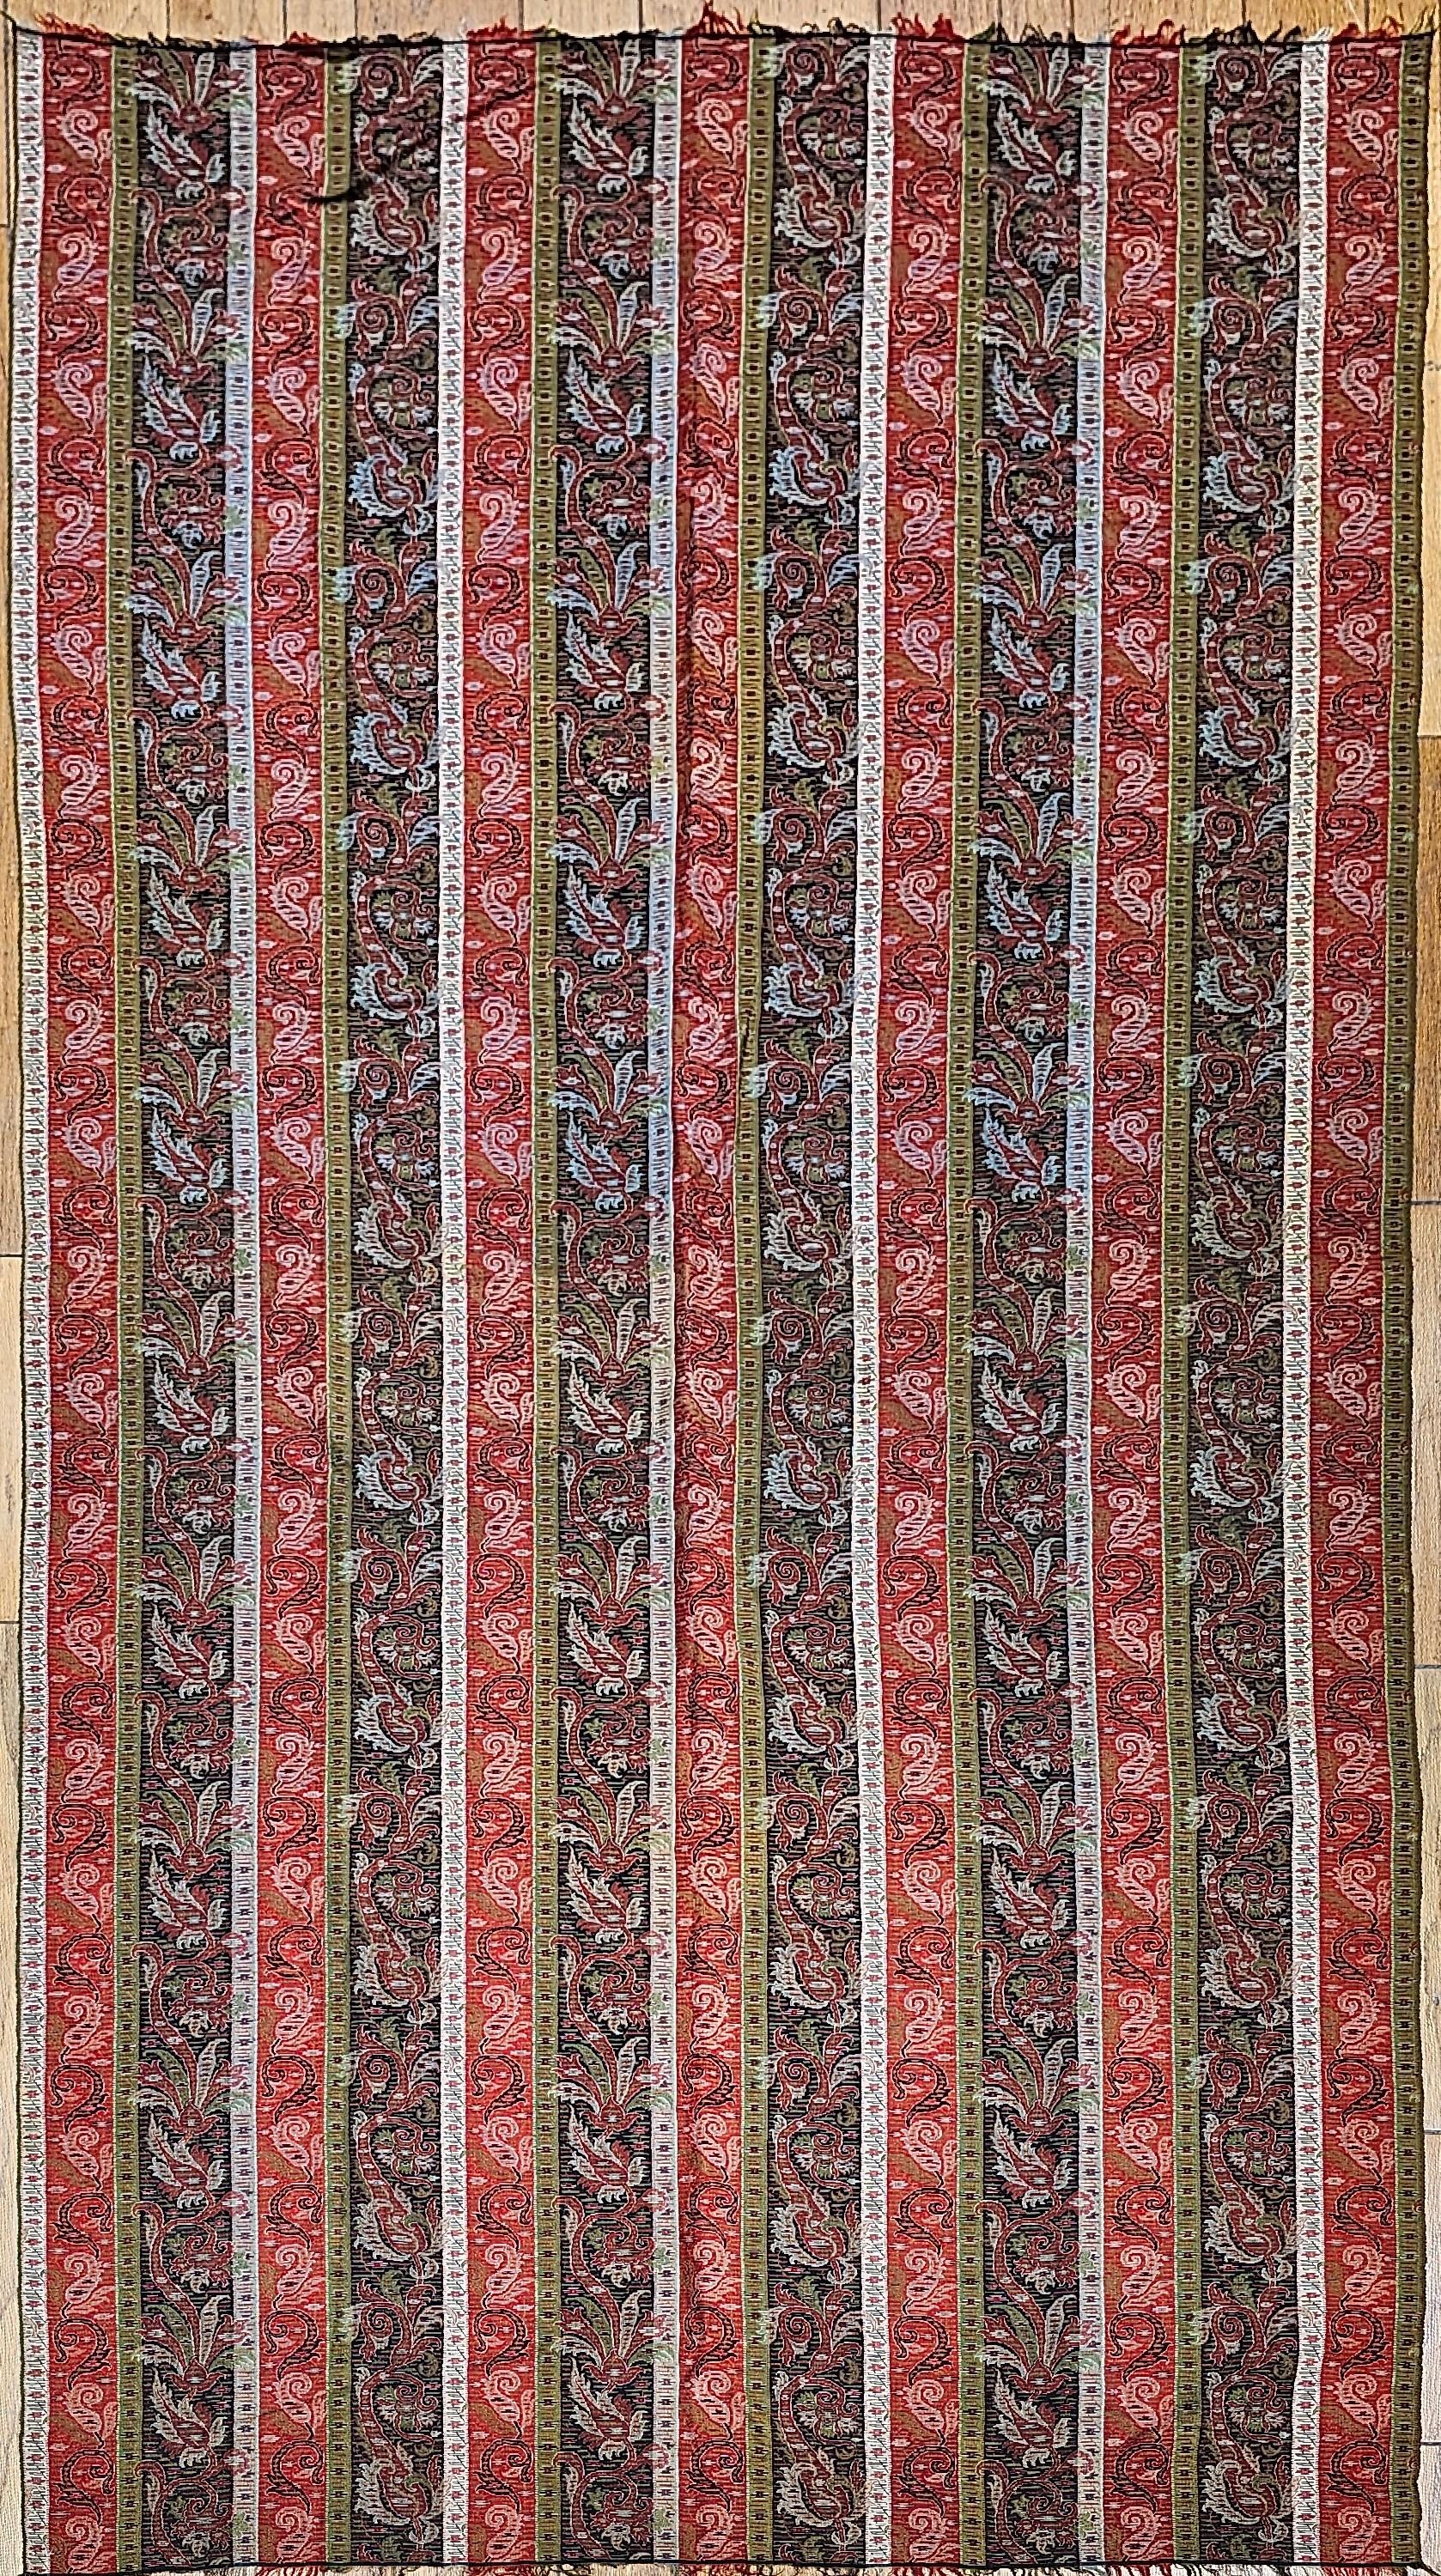 19th Century hand -woven Kashmiri Paisley Shawl from NW India in brick red, ivory, black and green.  The shawl has a paisley pattern as the border with larger paisley form on each end with a center part of the shawl woven in a blank black material. 